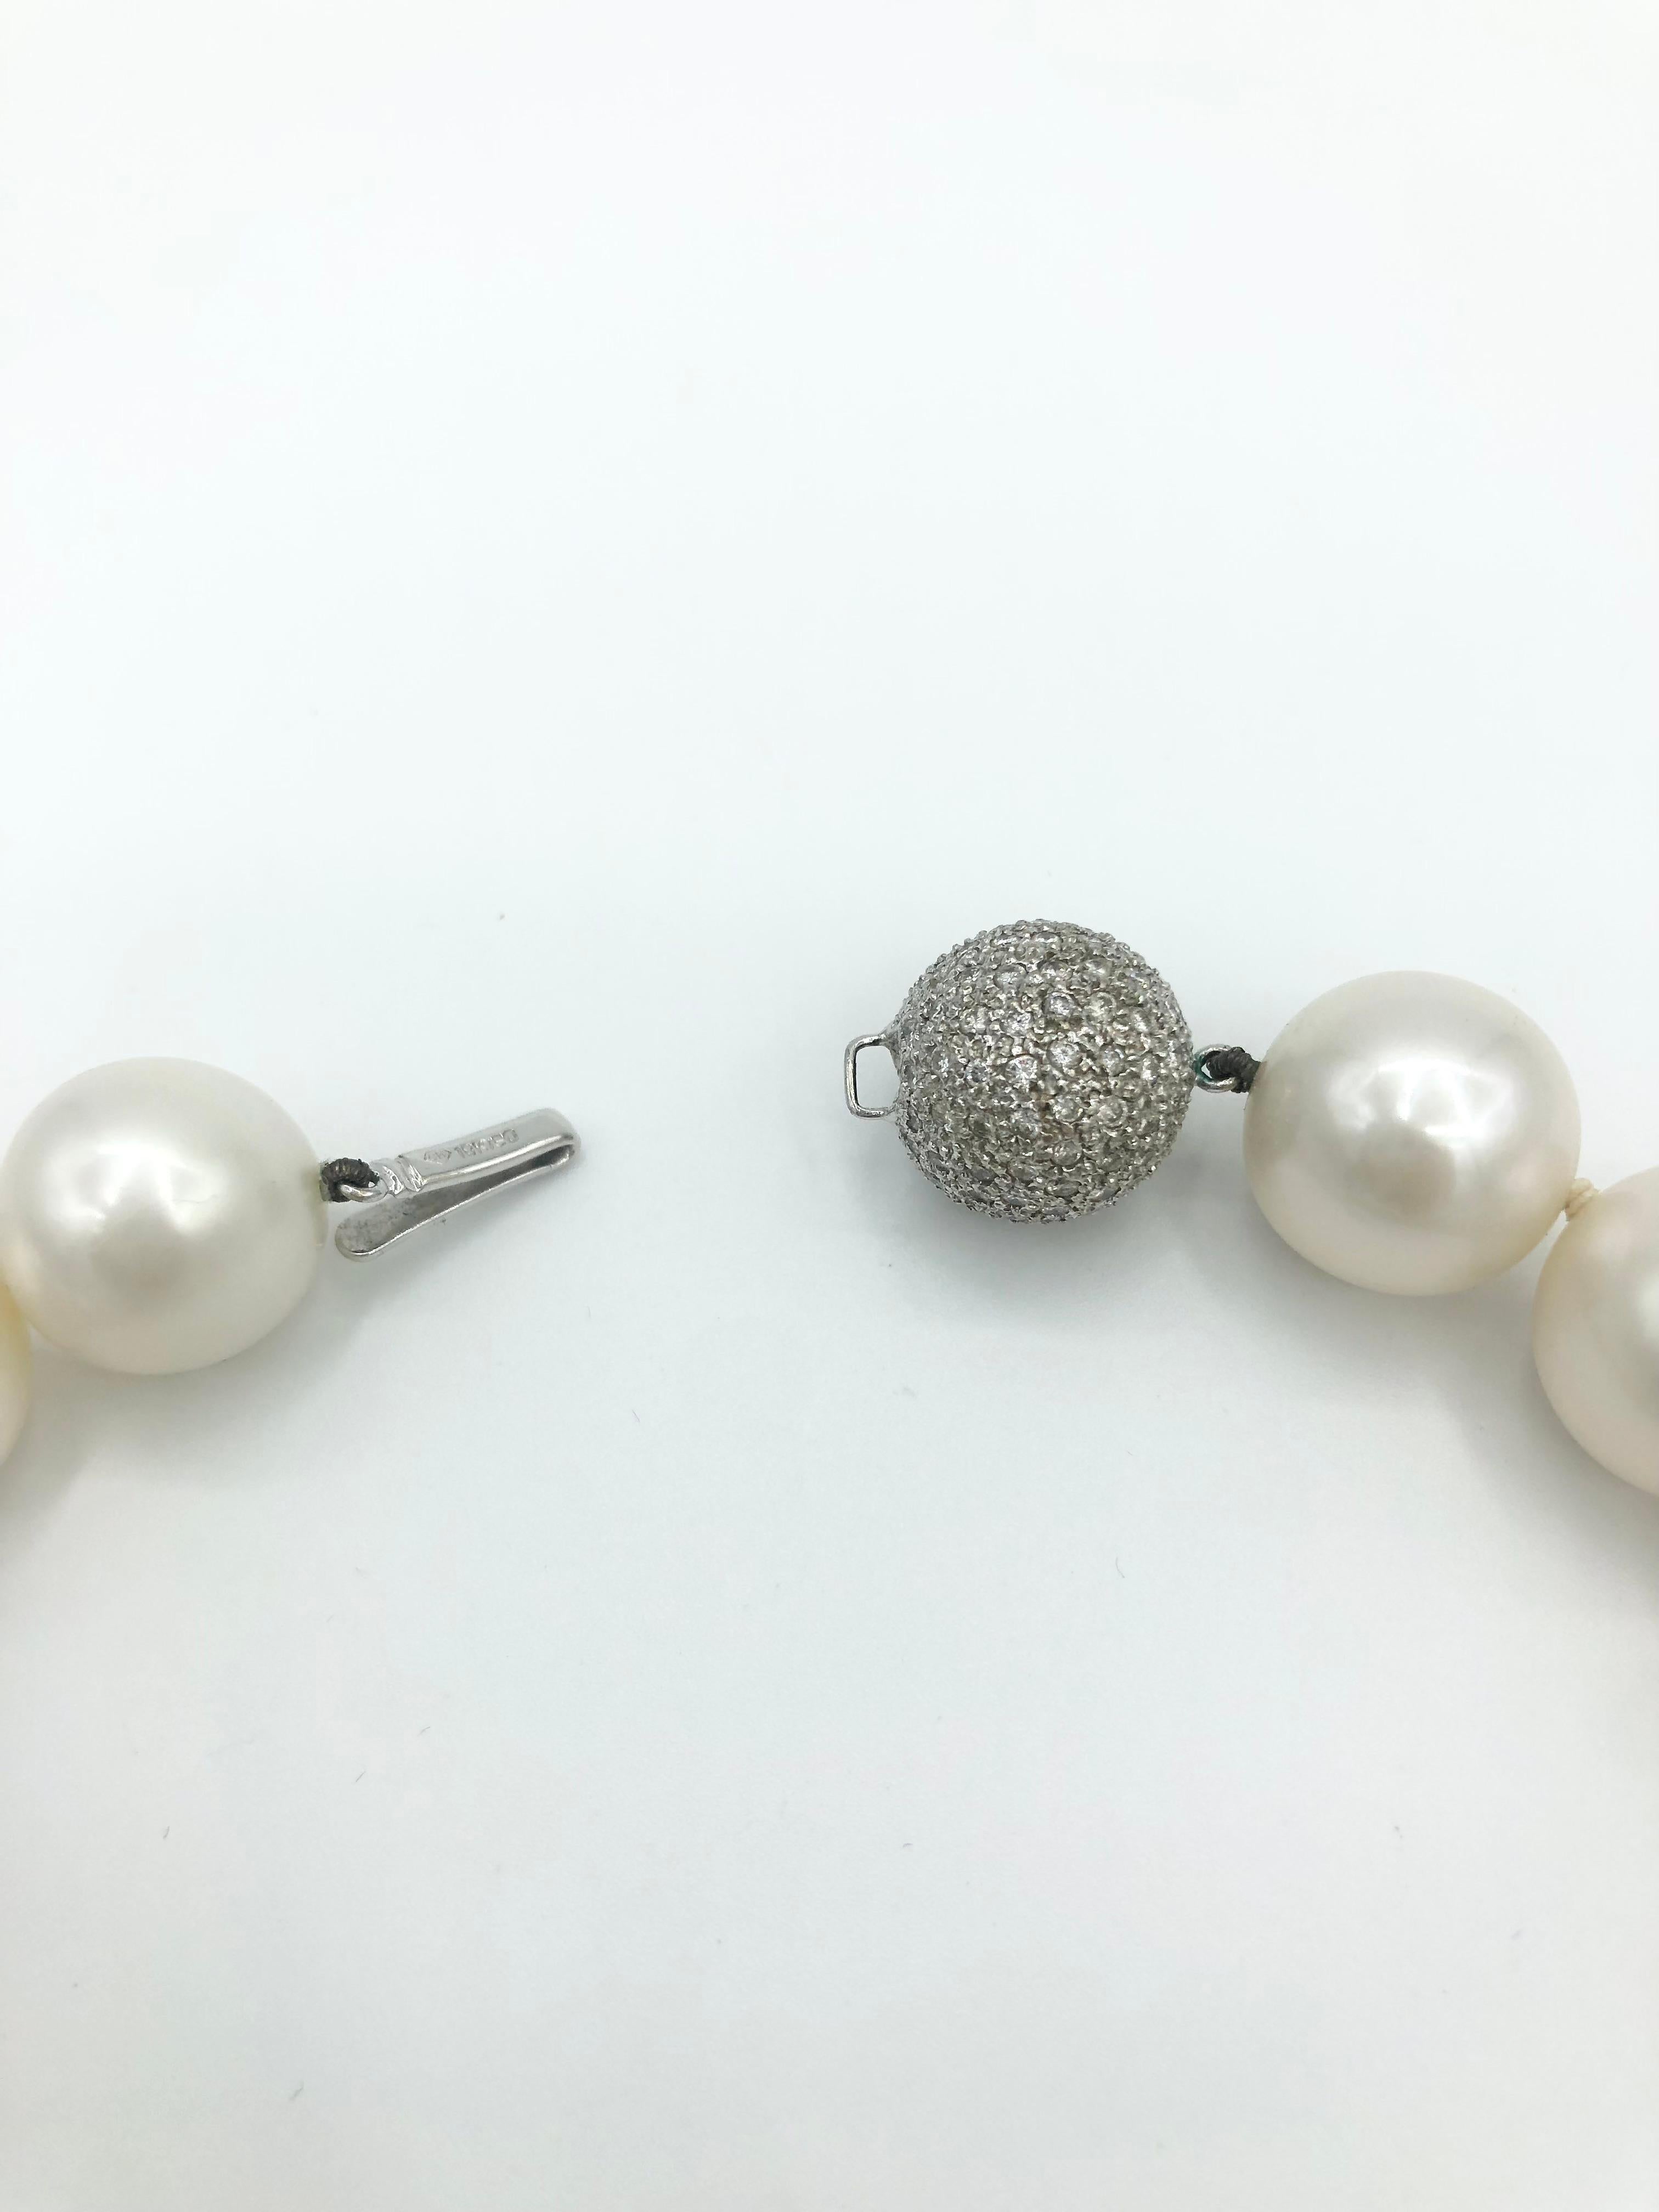 Rare 15-20mm South Sea Pearl Necklace 

Range: 15mm - 20mm
Clasp: 14.5mm 
Length: 17.5 inches
